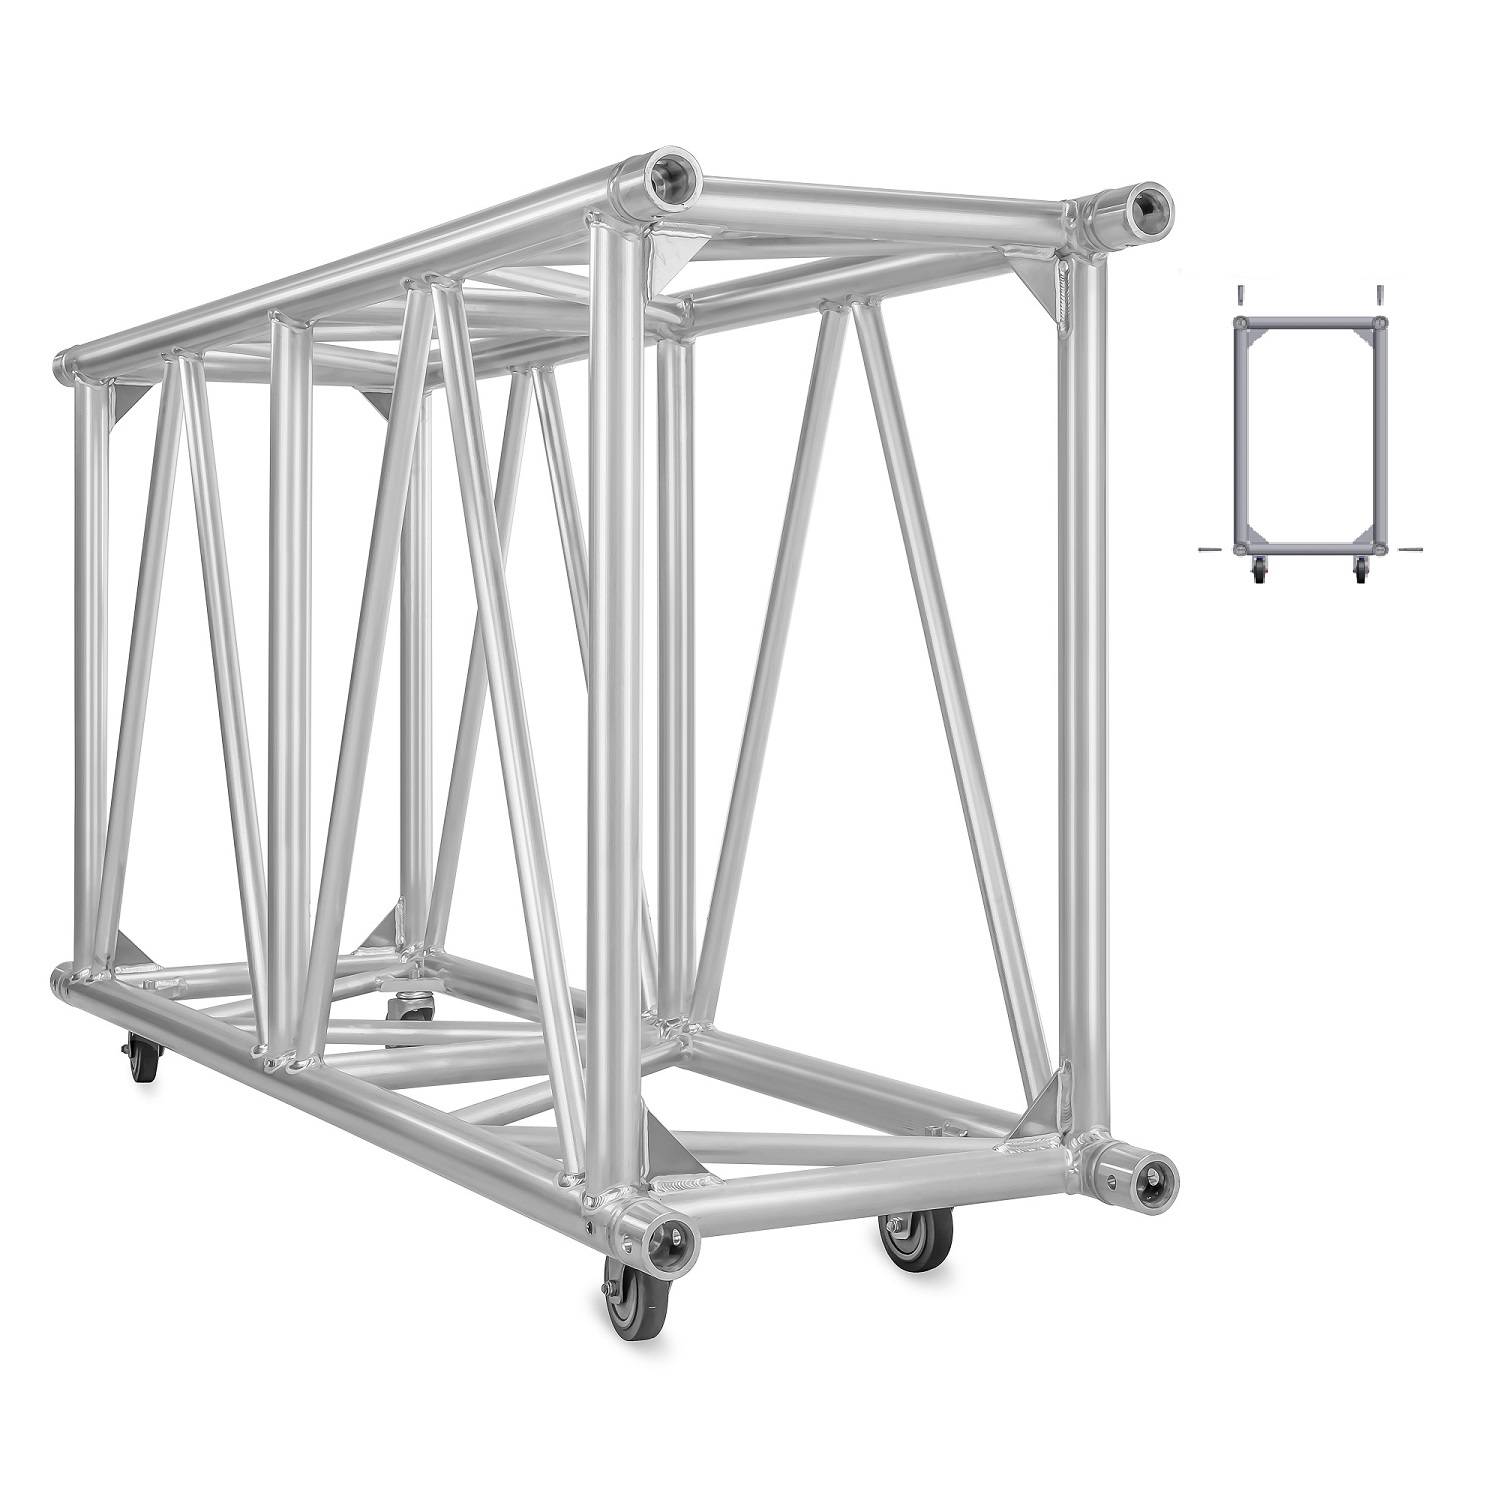 M950 - Ultra High Capacity truss with free-span up to 40m